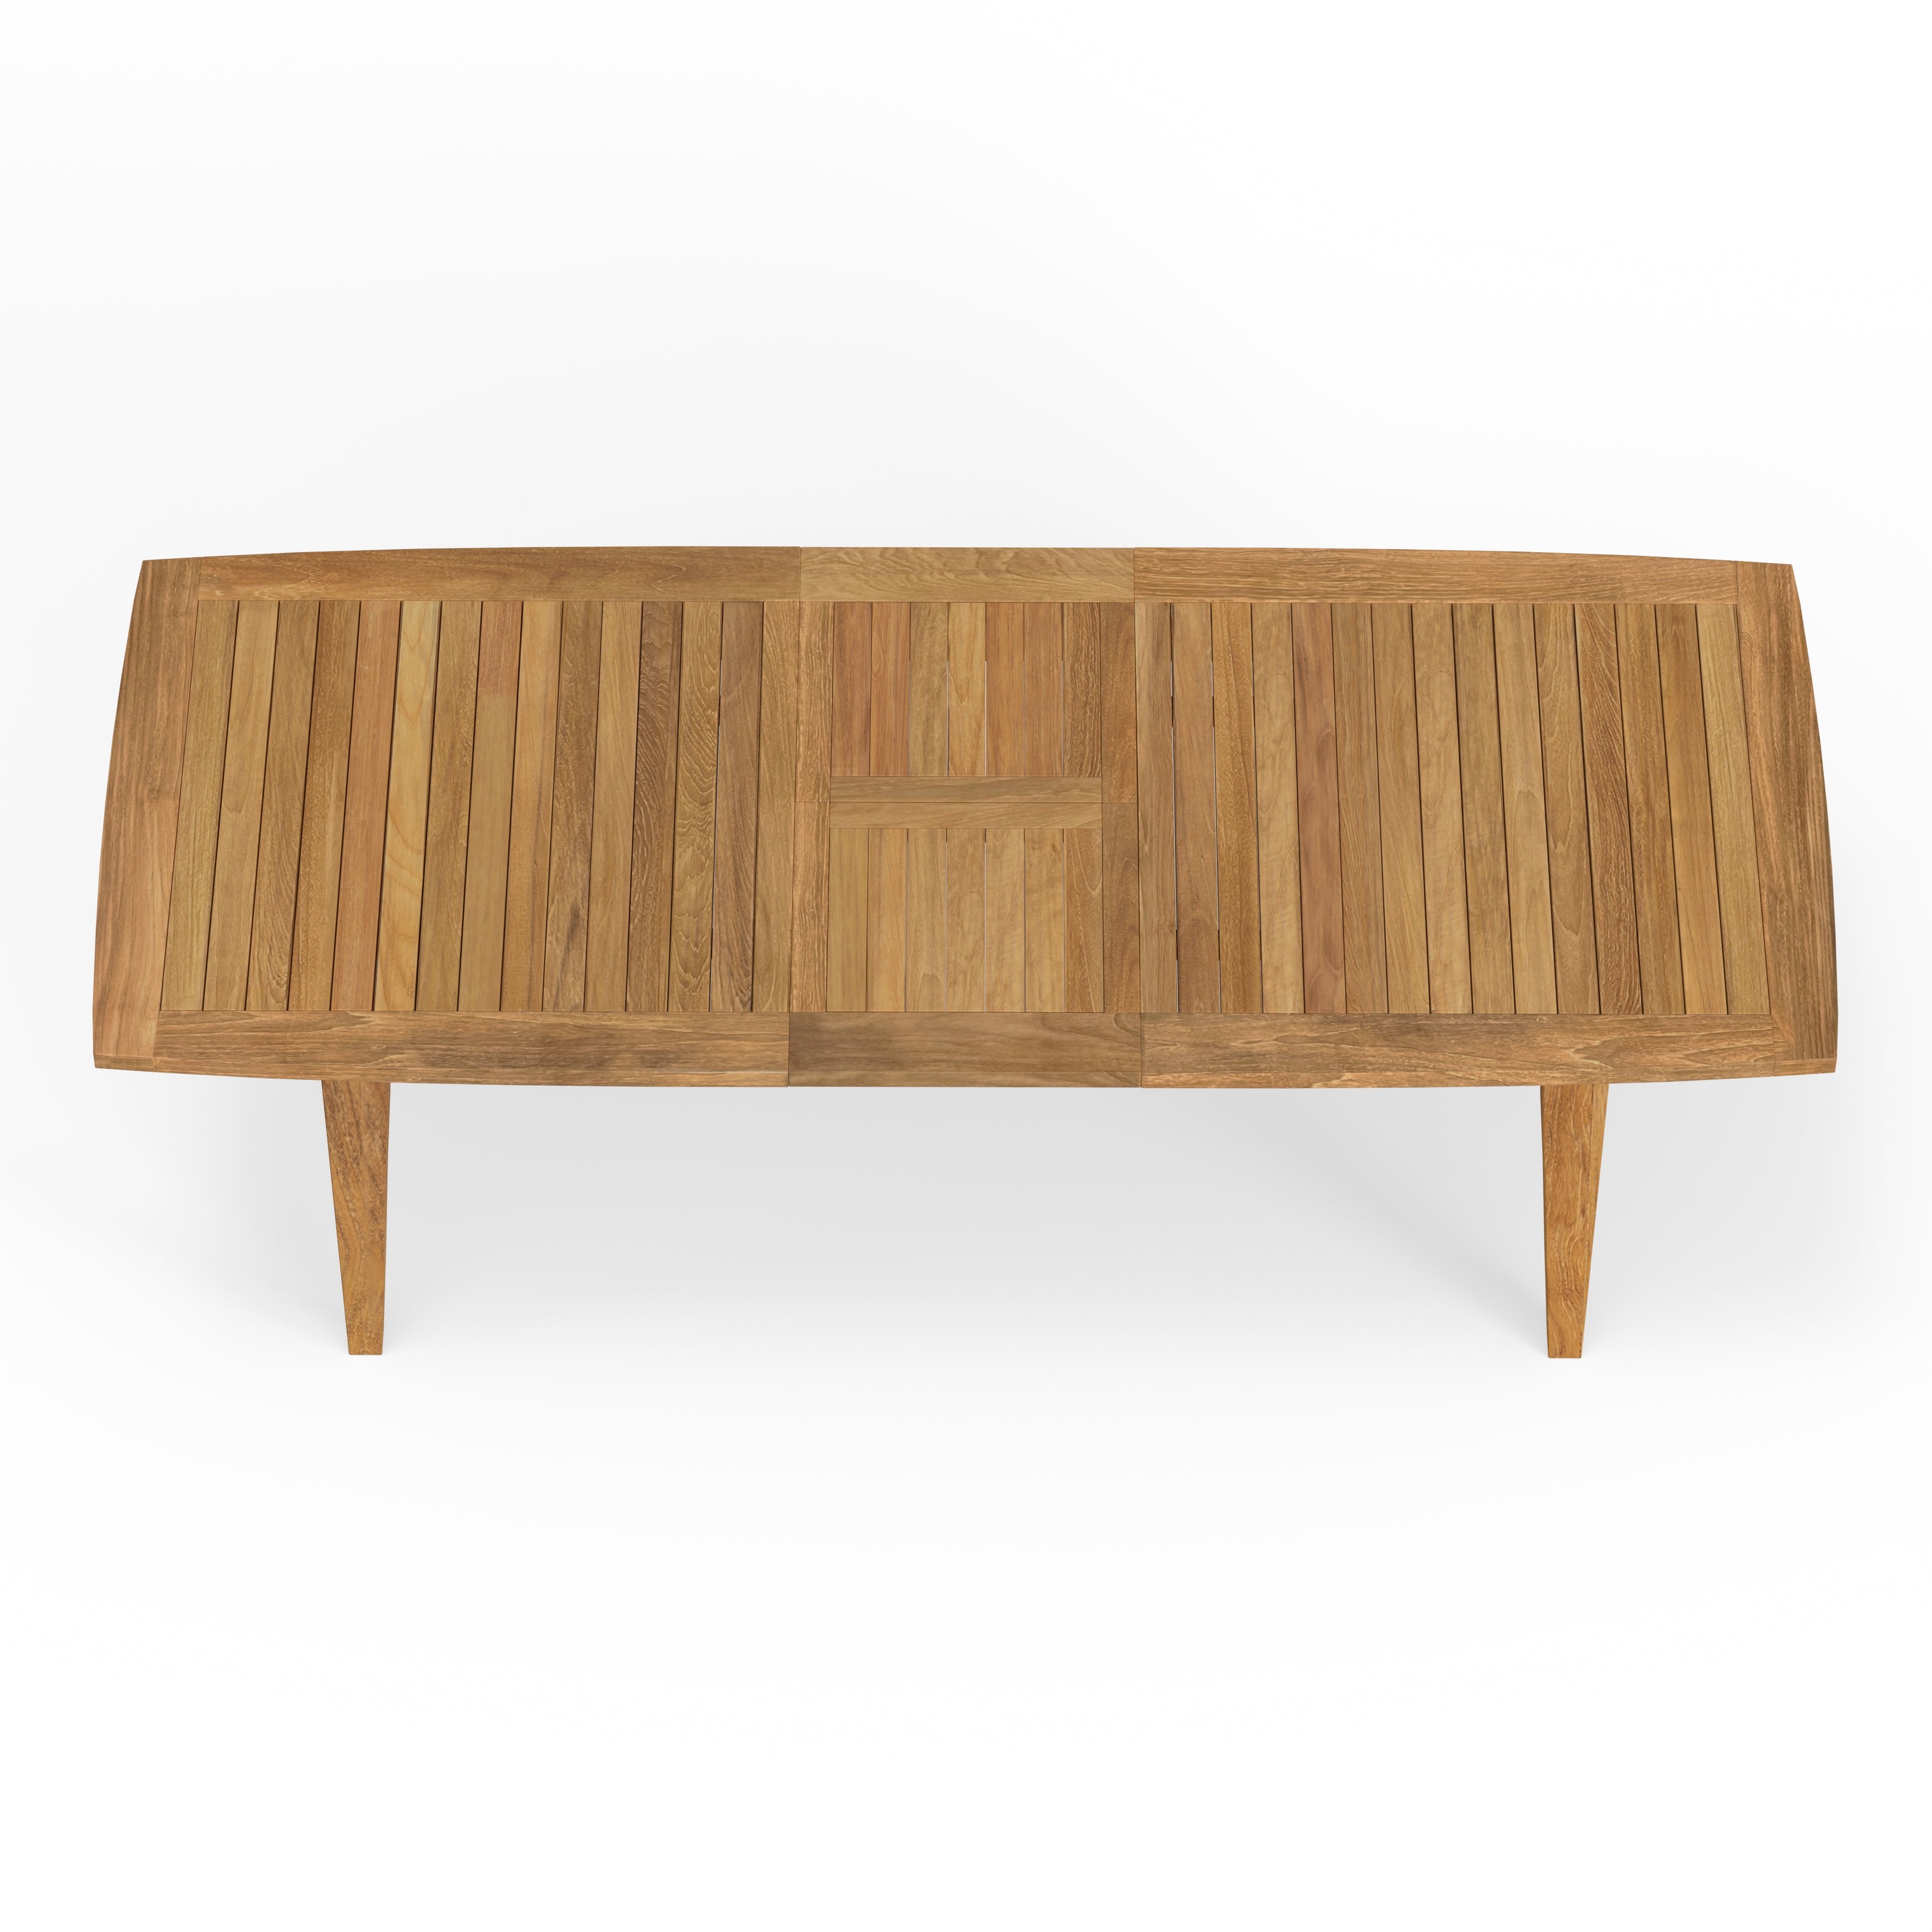 Modern Outdoor Teak Dining Table Chairs And Bench